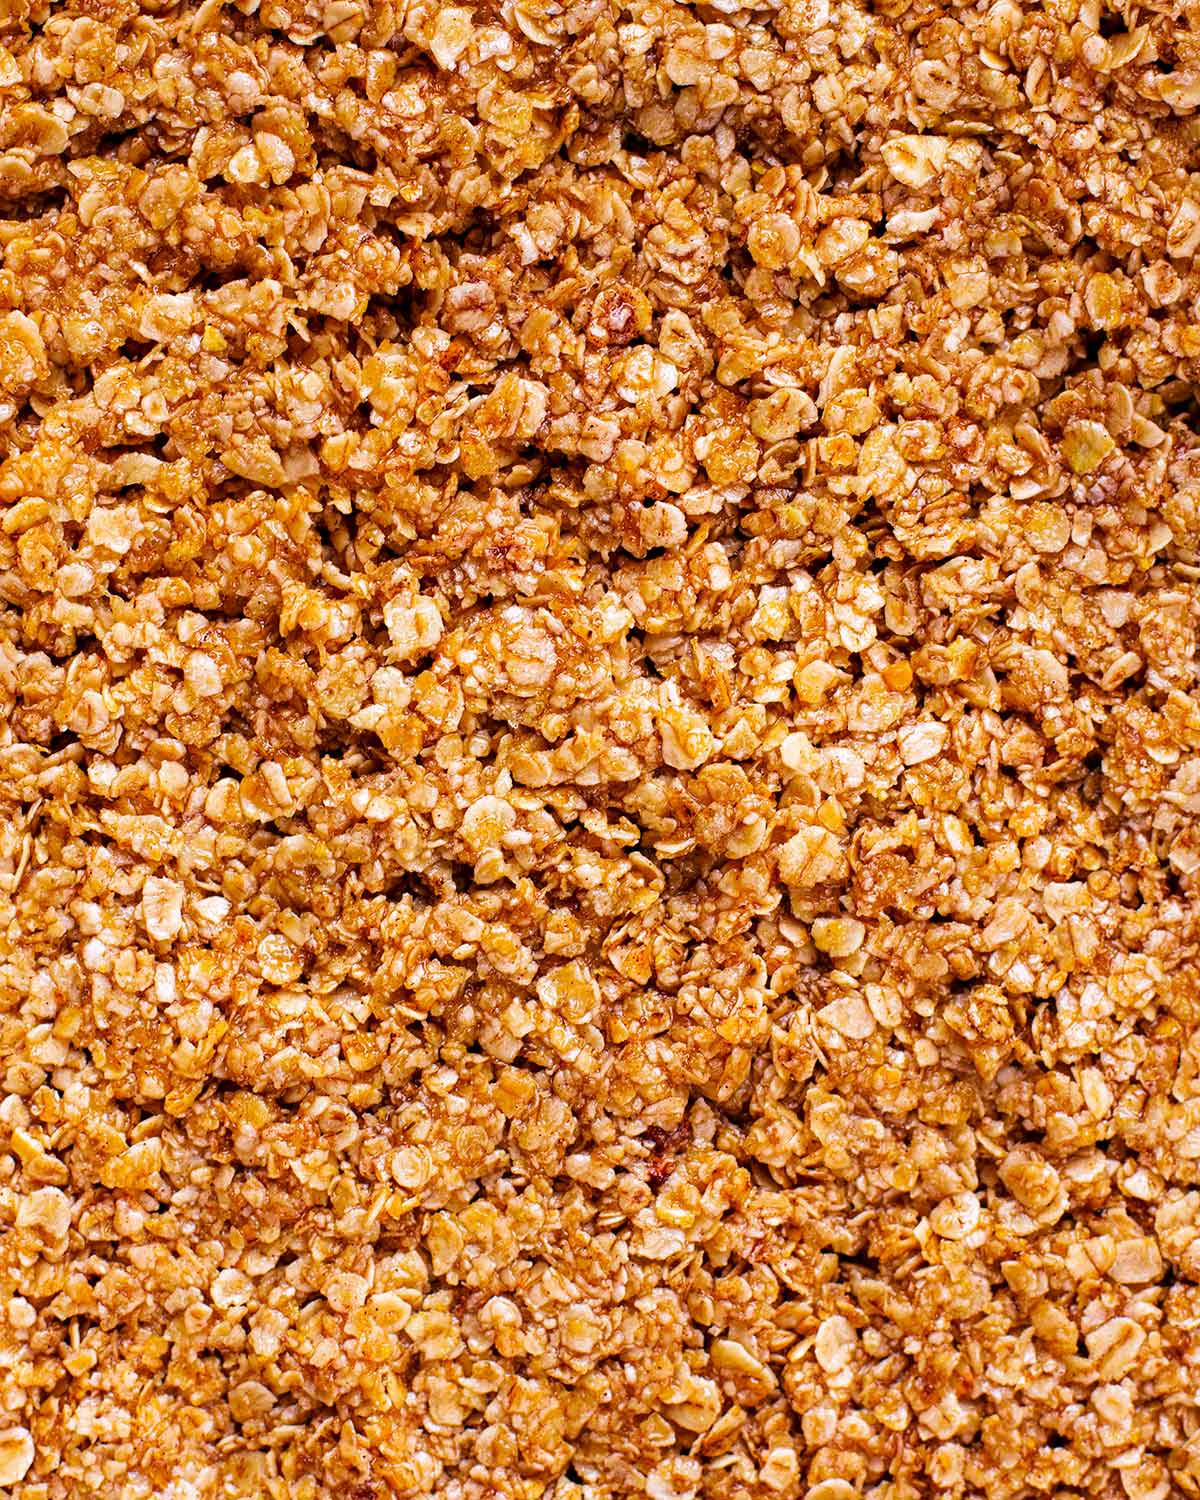 A tray of cooked flapjack before being cut into bars.